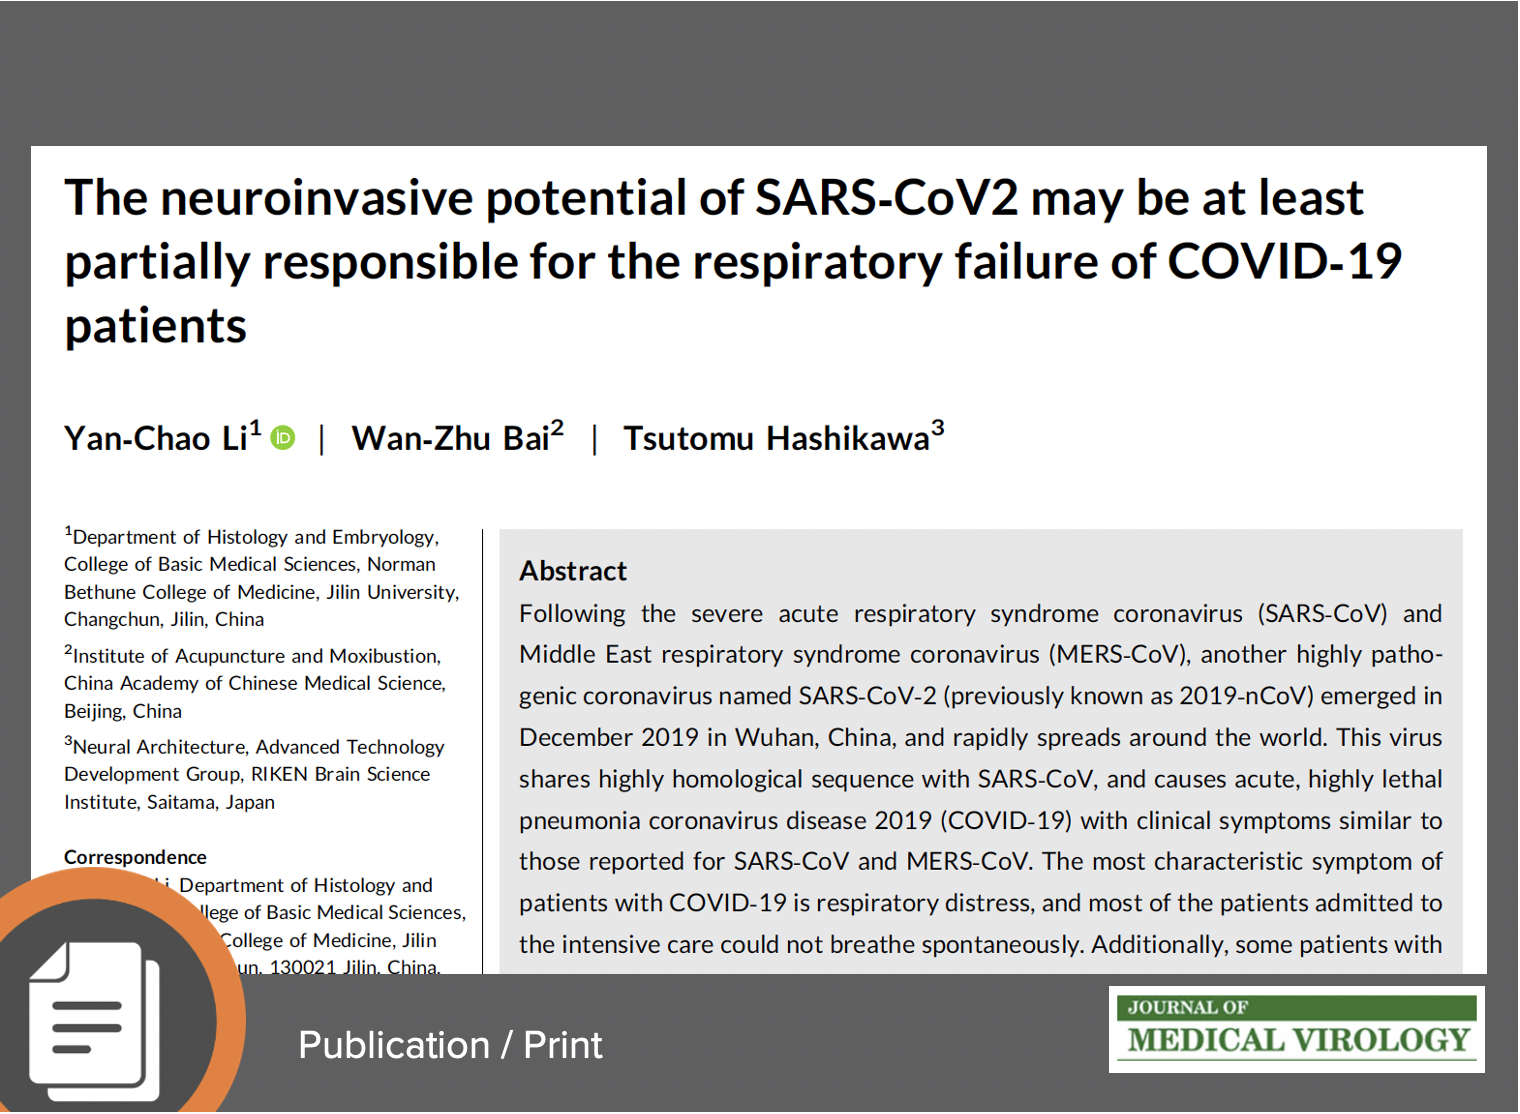 The Neuroinvasive Potential of SARS‐Cov2 May Be At Least Partially Responsible for the Respiratory Failure of COVID‐19 Patients